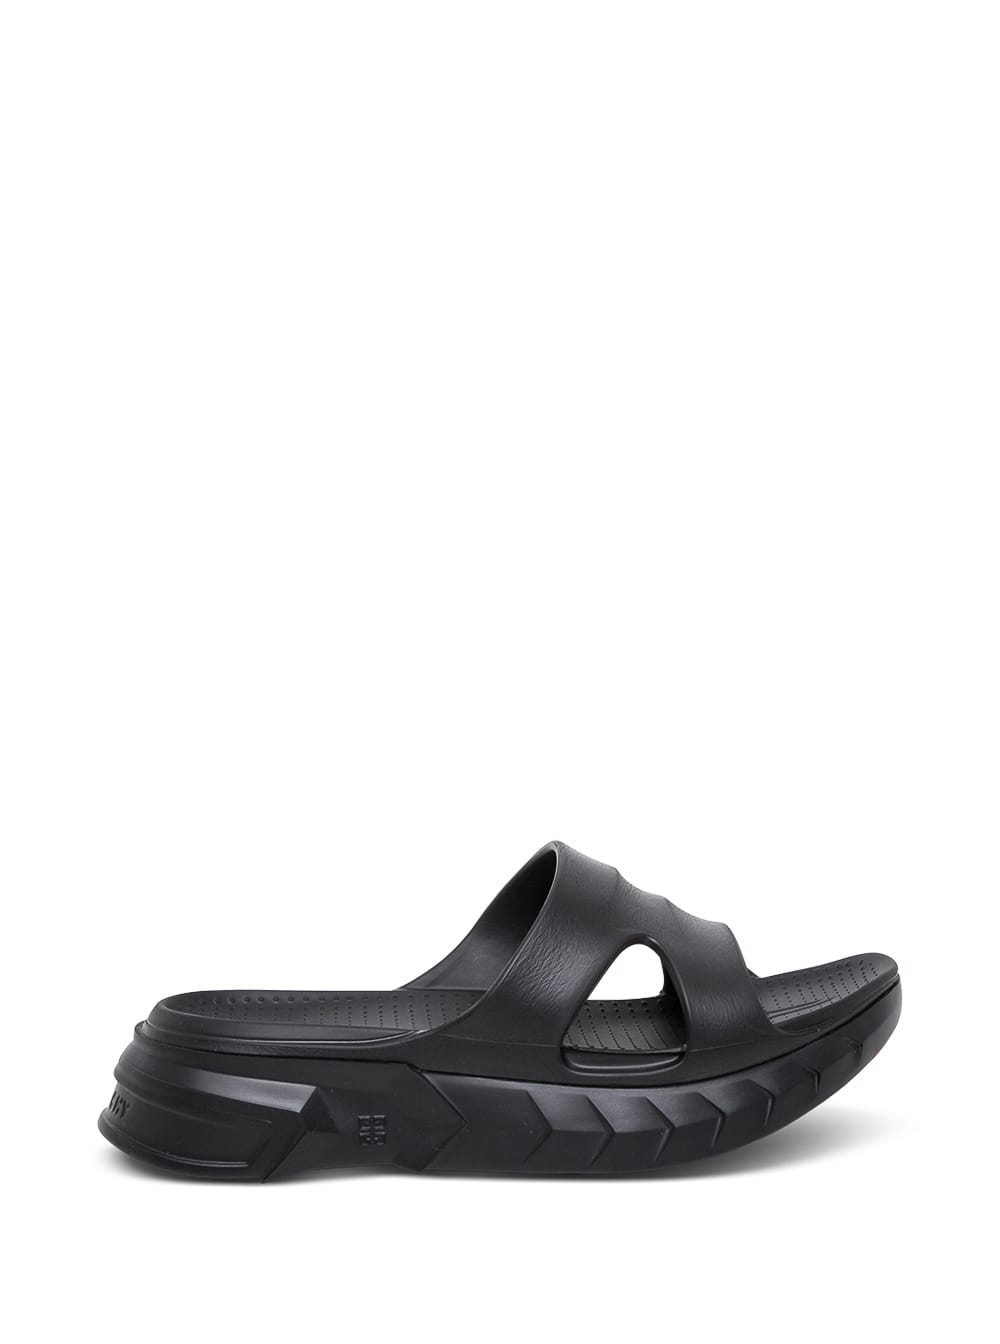 Givenchy Black Rubber Marshmallow Sandals